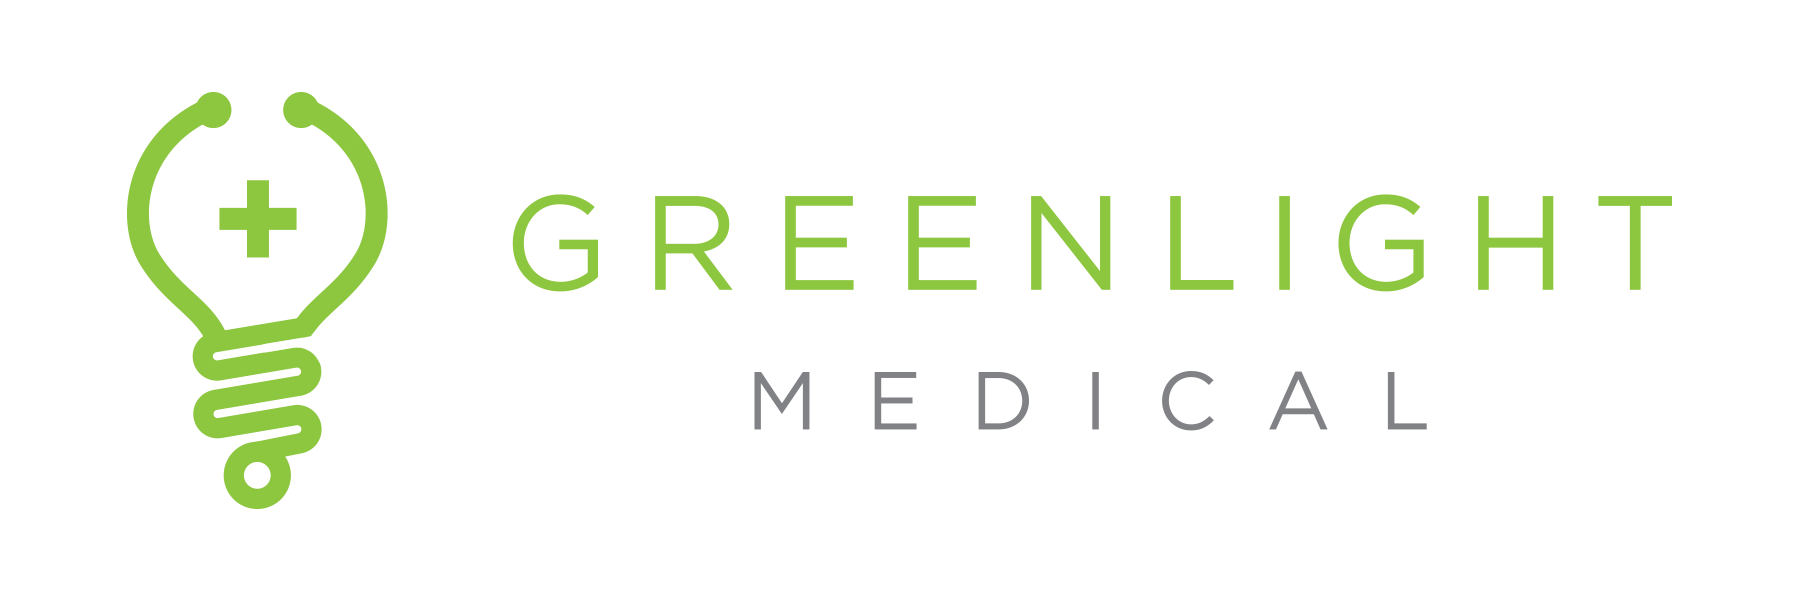 GreenLight Medical | Value Analysis Supply Chain | Technology & Services